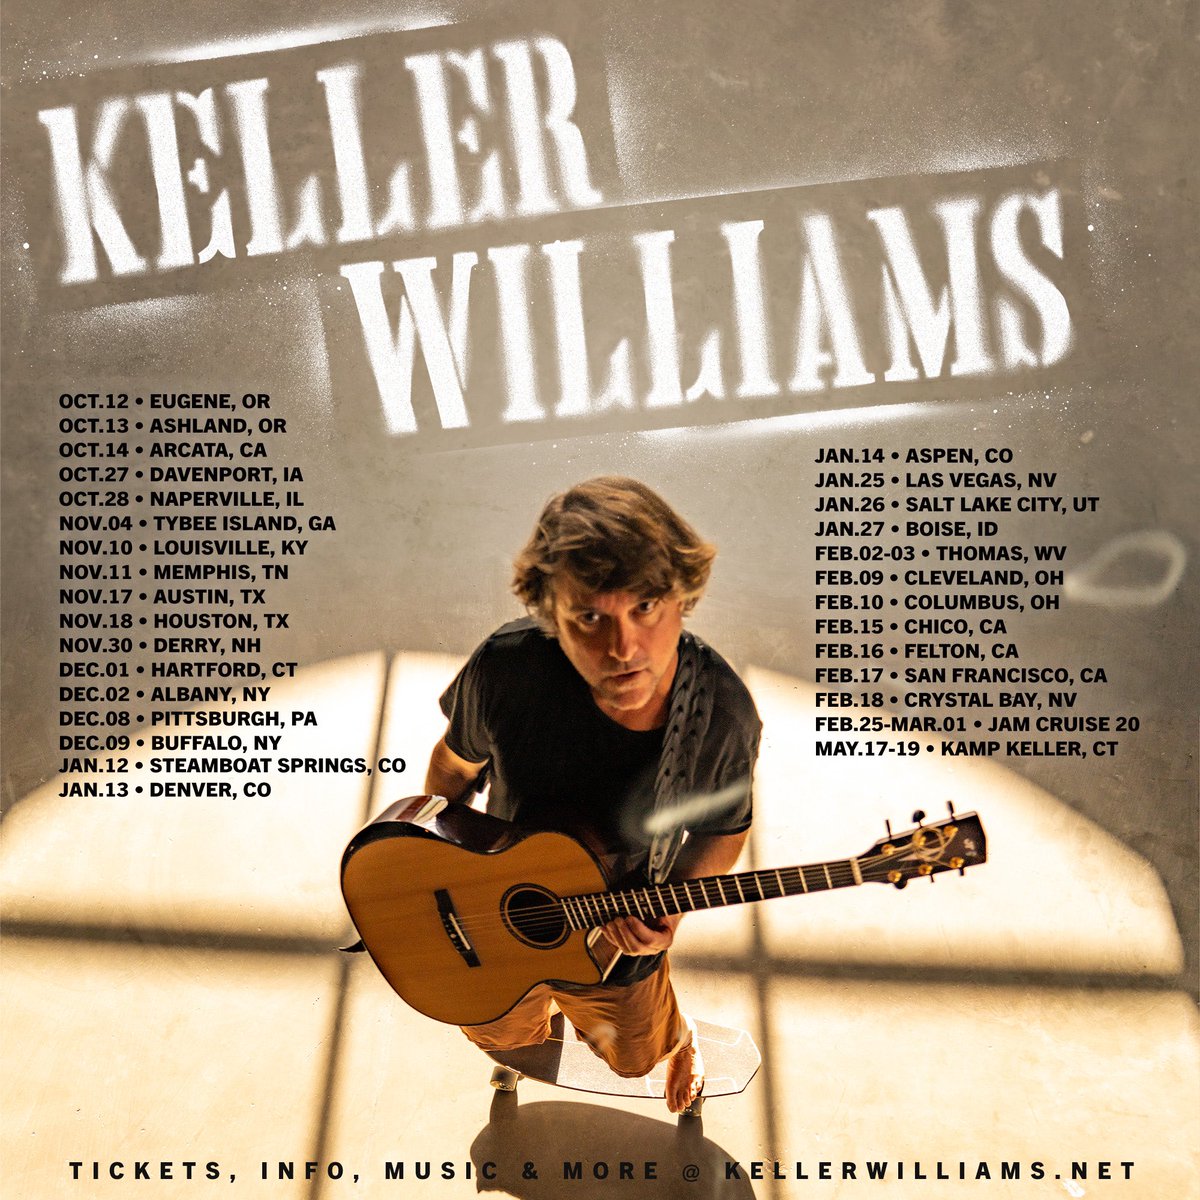 First of 29 solo shows kicks off tonight in Eugene, Oregon @WOWHall, tomorrow @LiveAtTheArmory Ashland and Saturday in Arcata, CA! kellerwilliams.net/shows